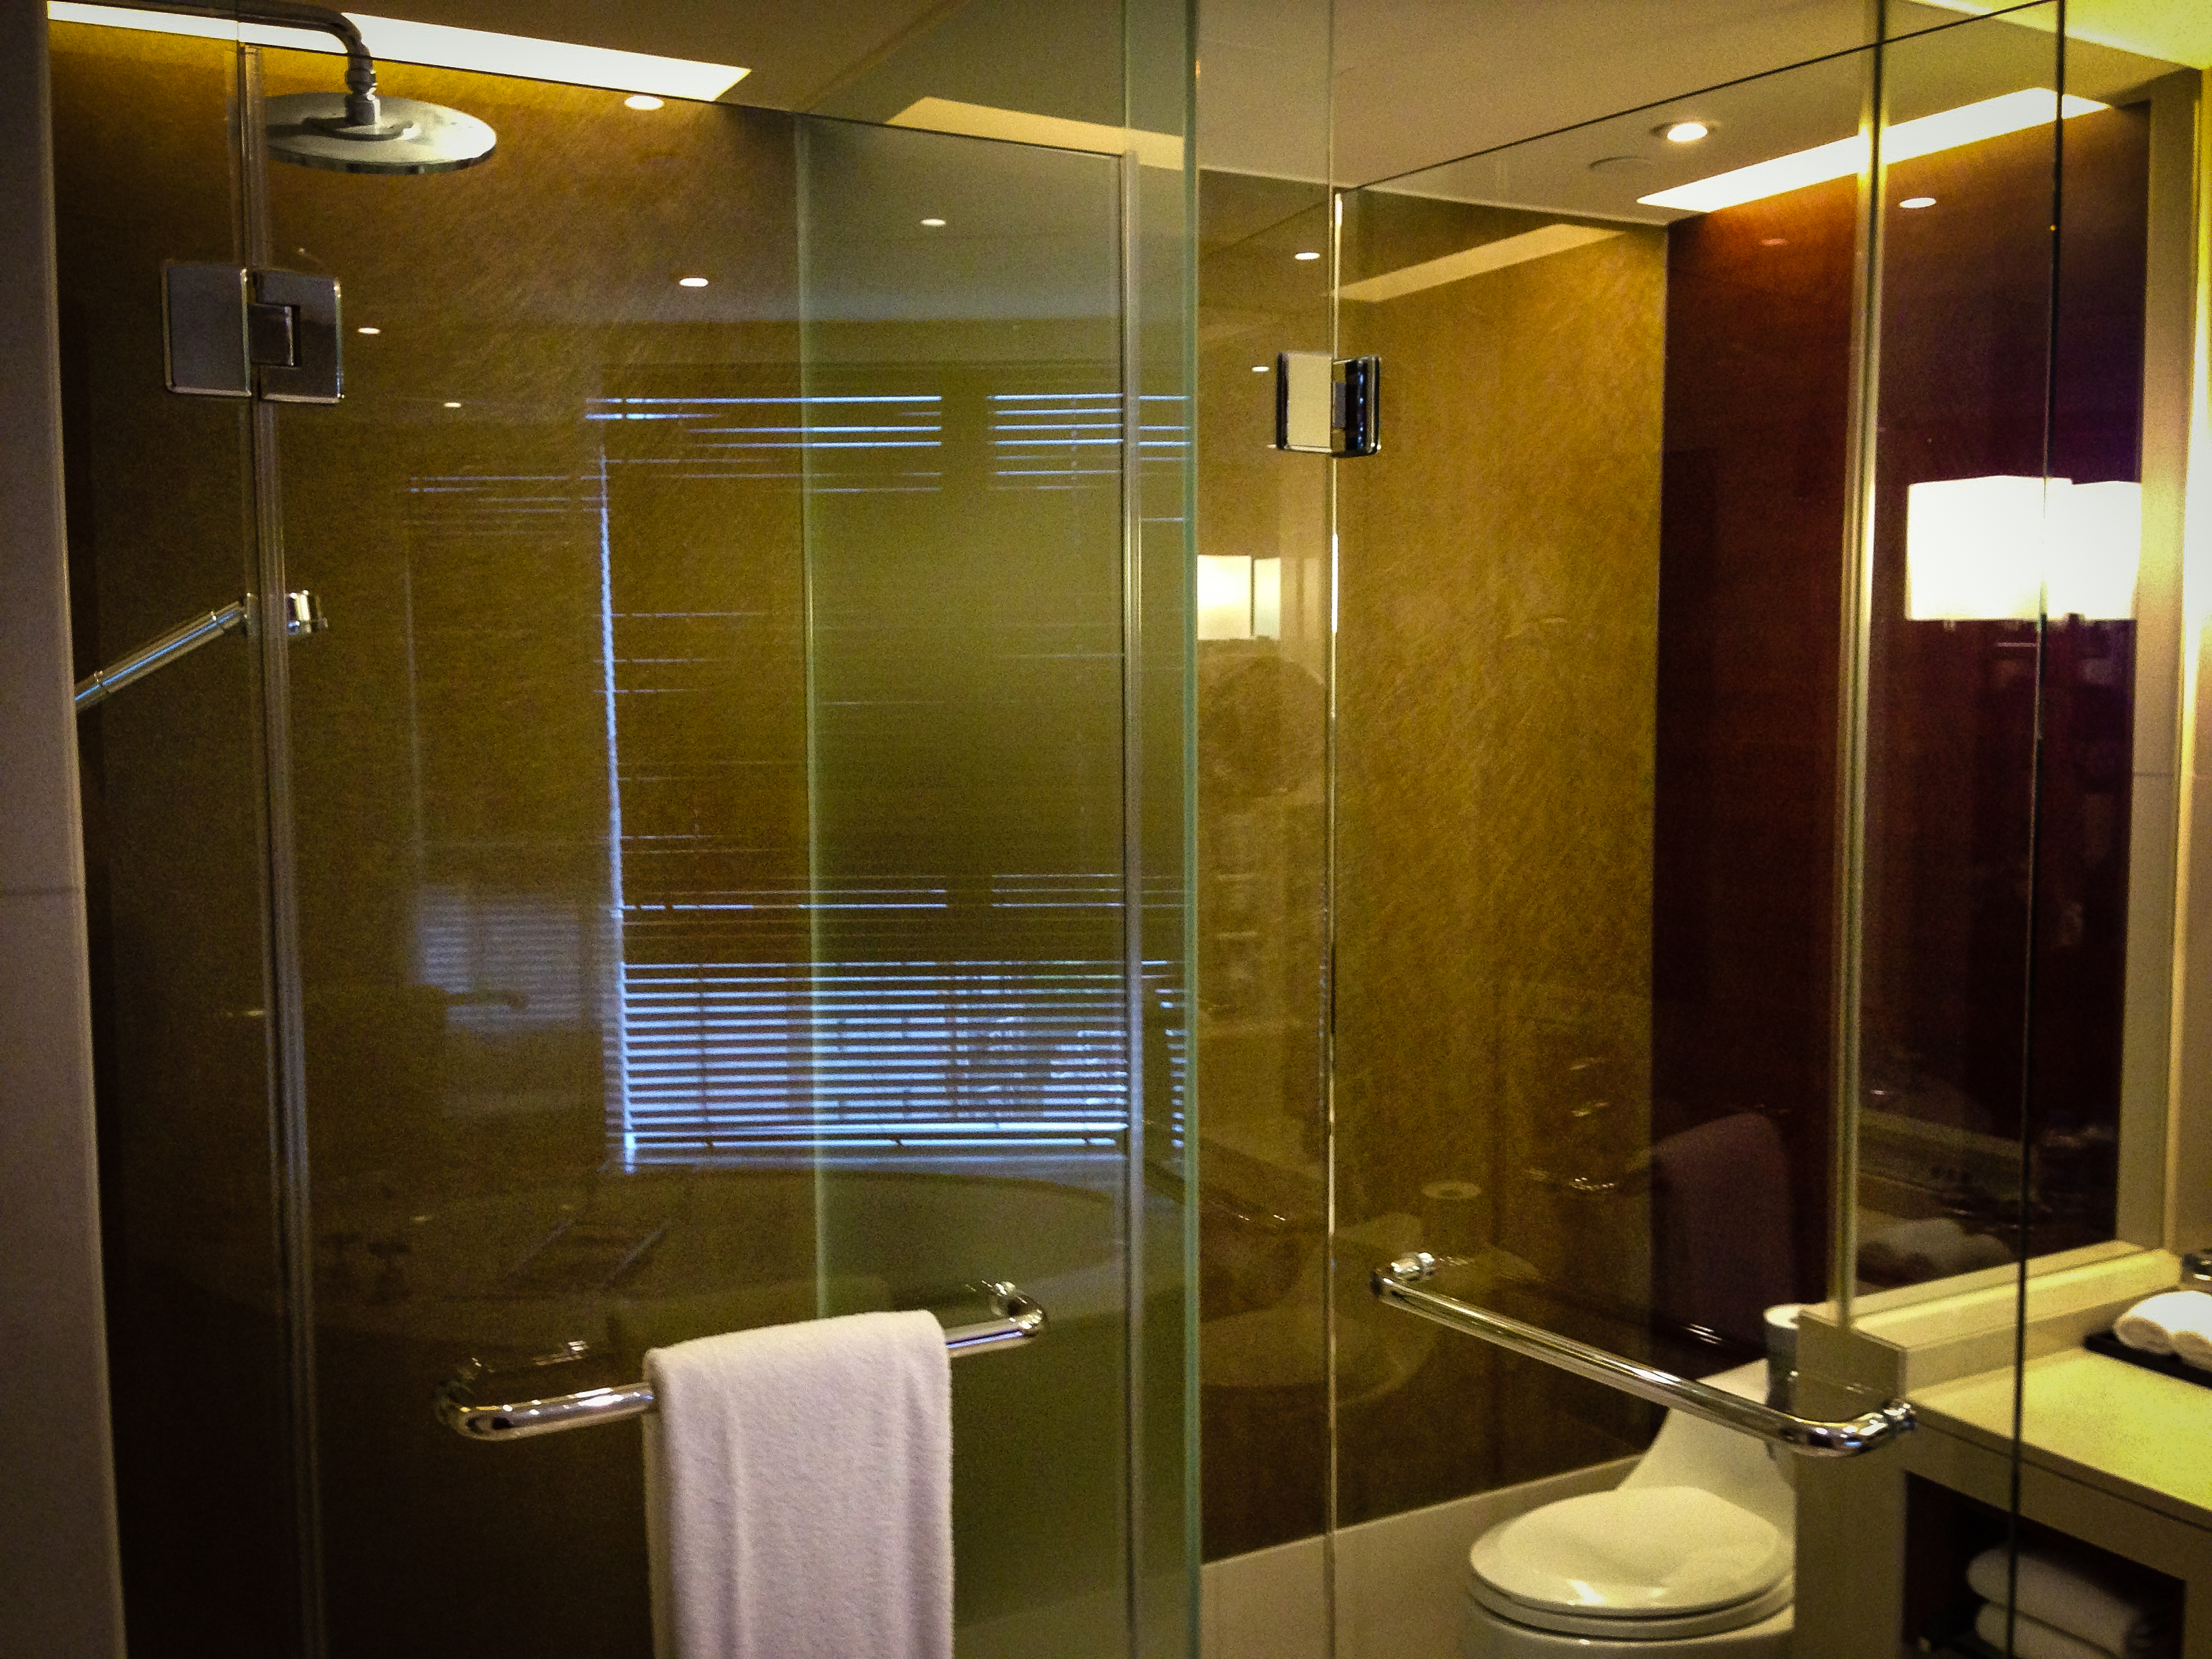 Shower and toilet areas, facing each other but separated by a glass wall...kind of awkard